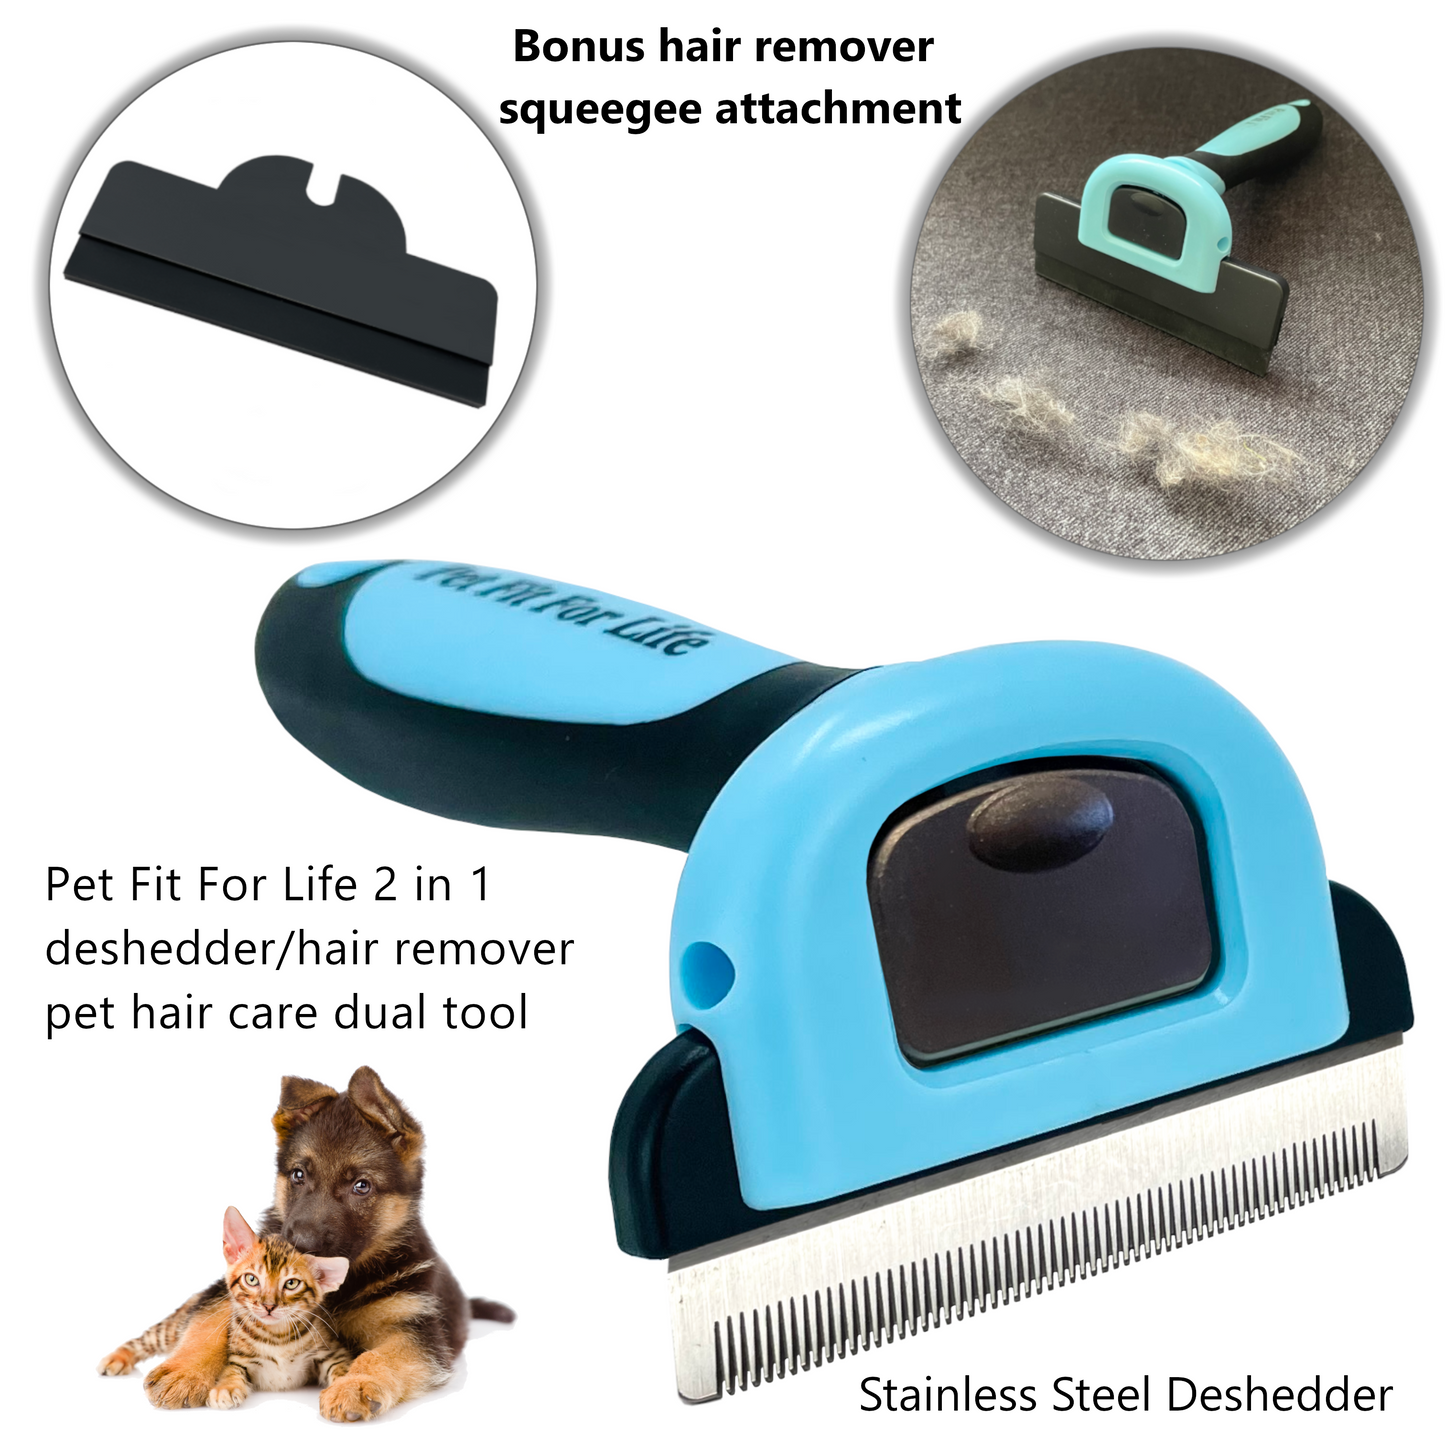 2-in-1 Dog/Cat Hair Tool - Deshedding, Dematting Brush and Fur Remover Squeegee Combo